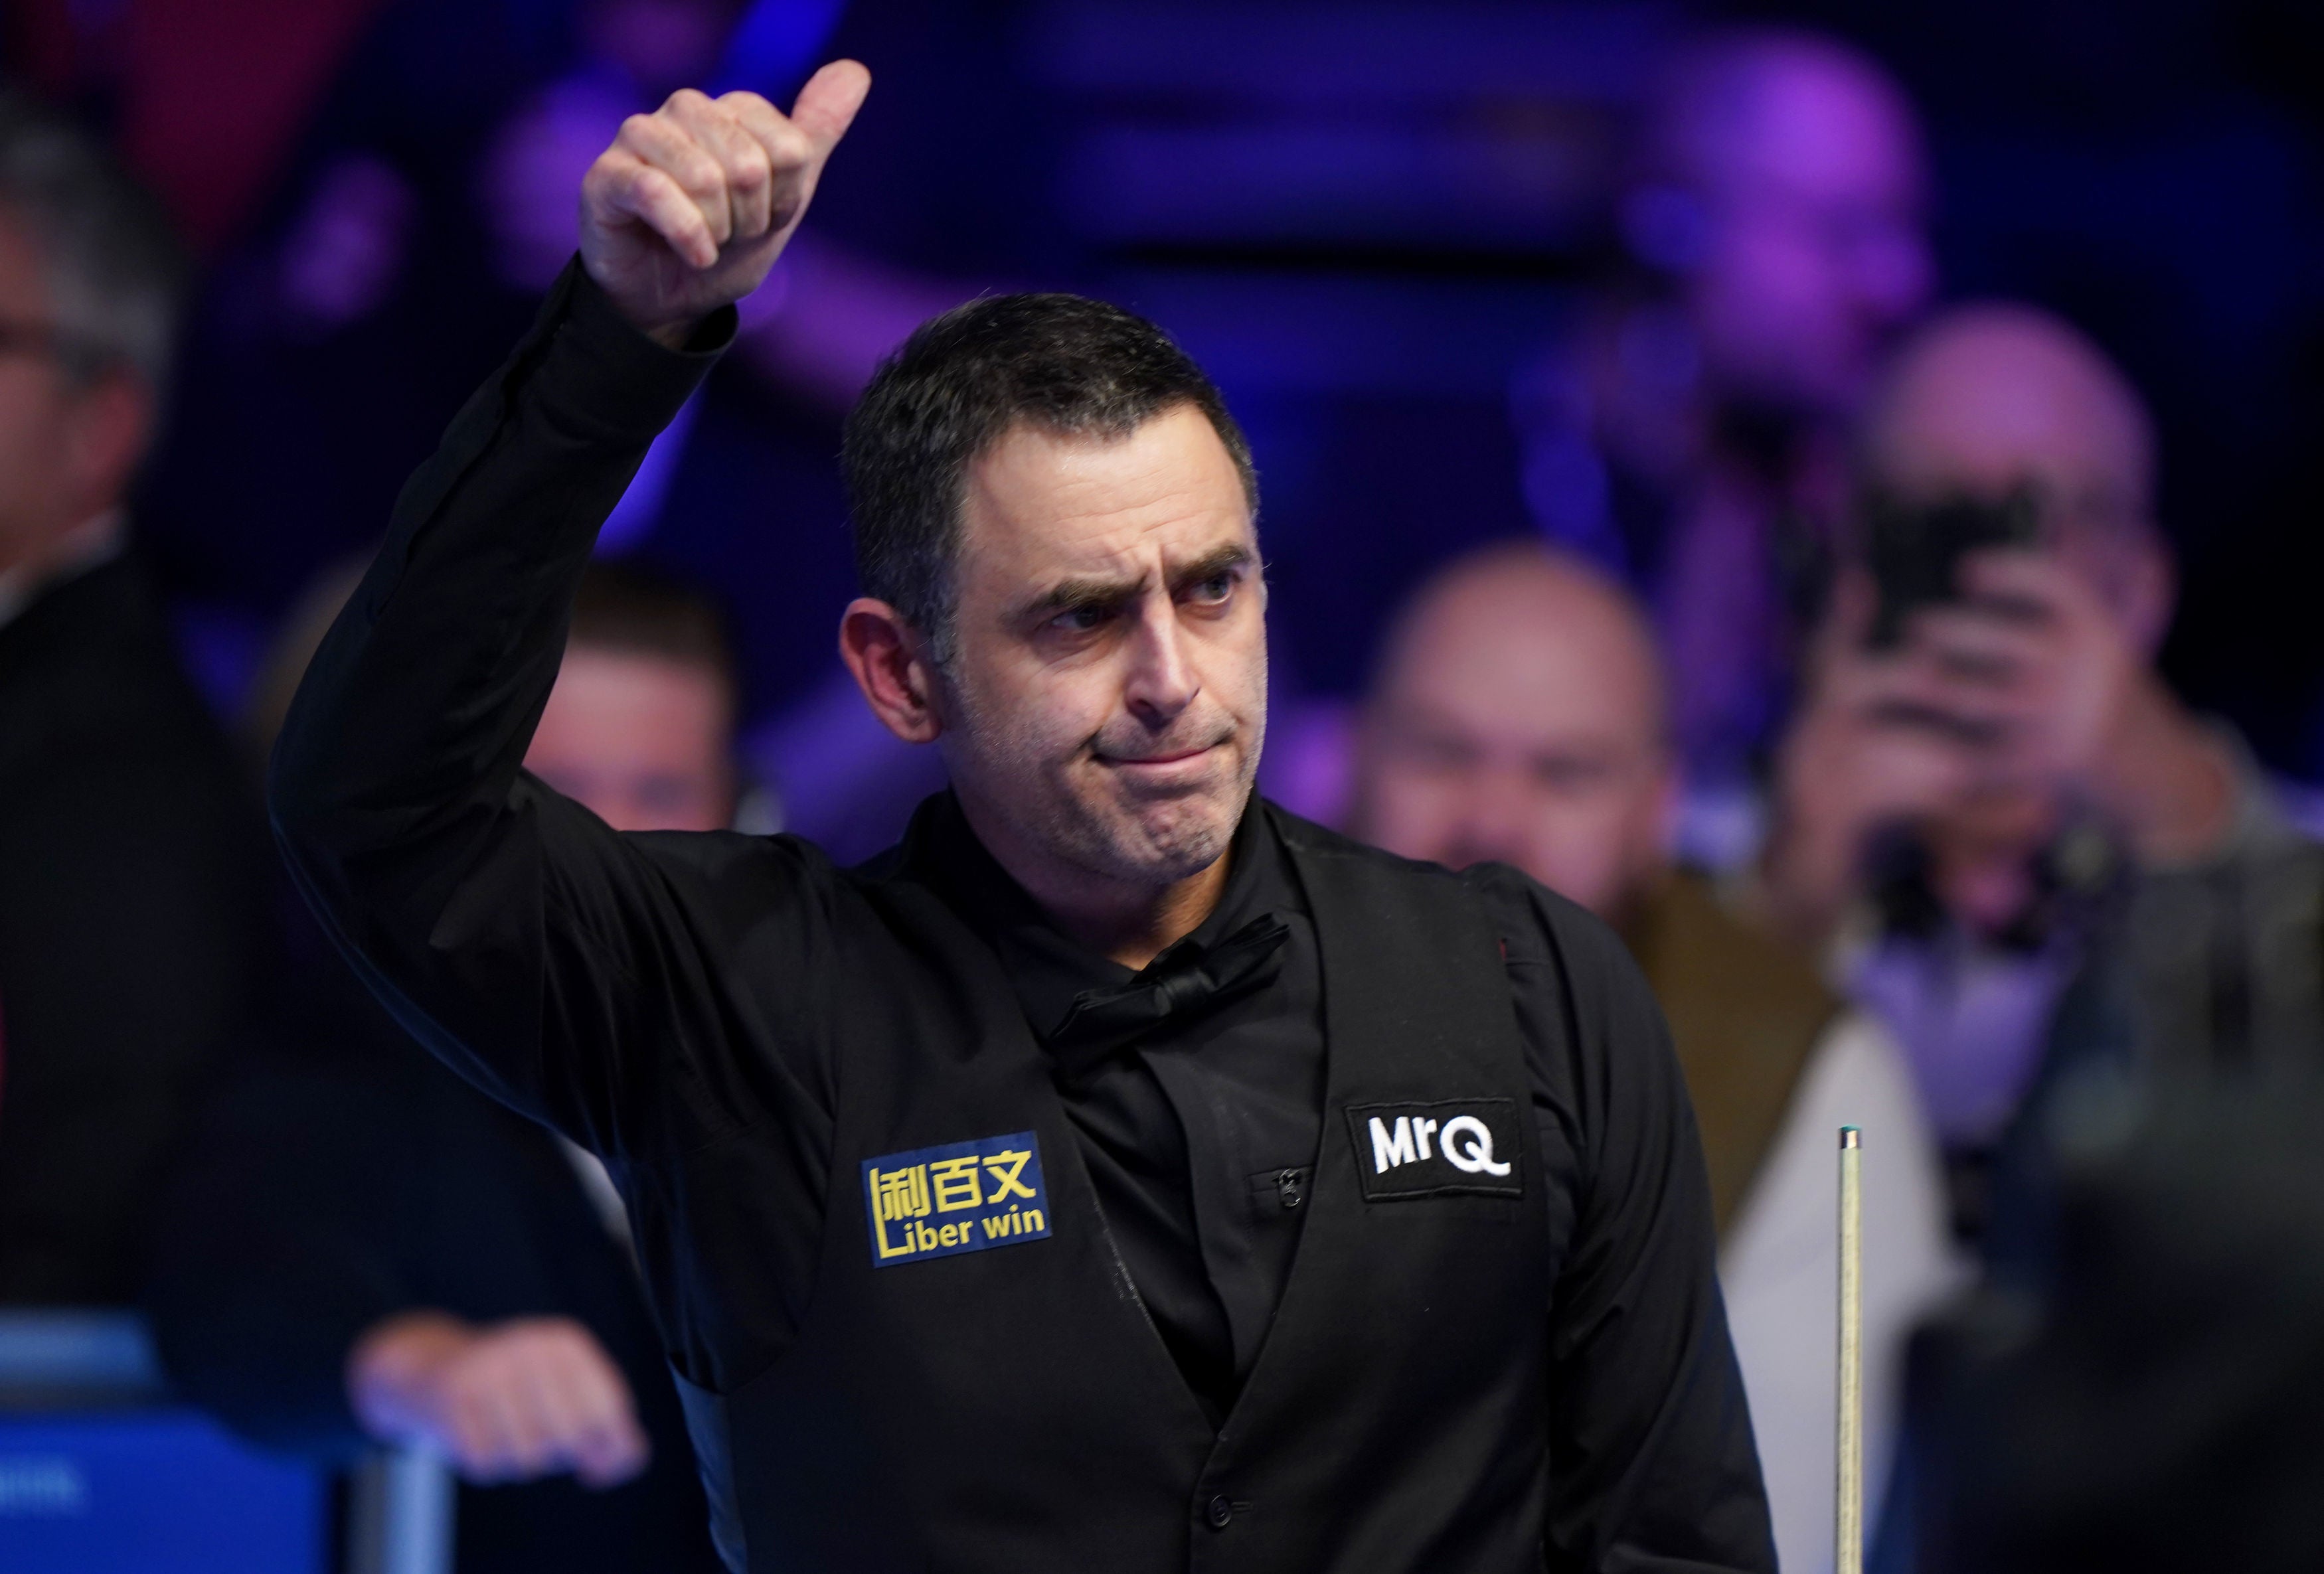 Ronnie O’Sullivan will be heading to Saudi Arabia for the new event